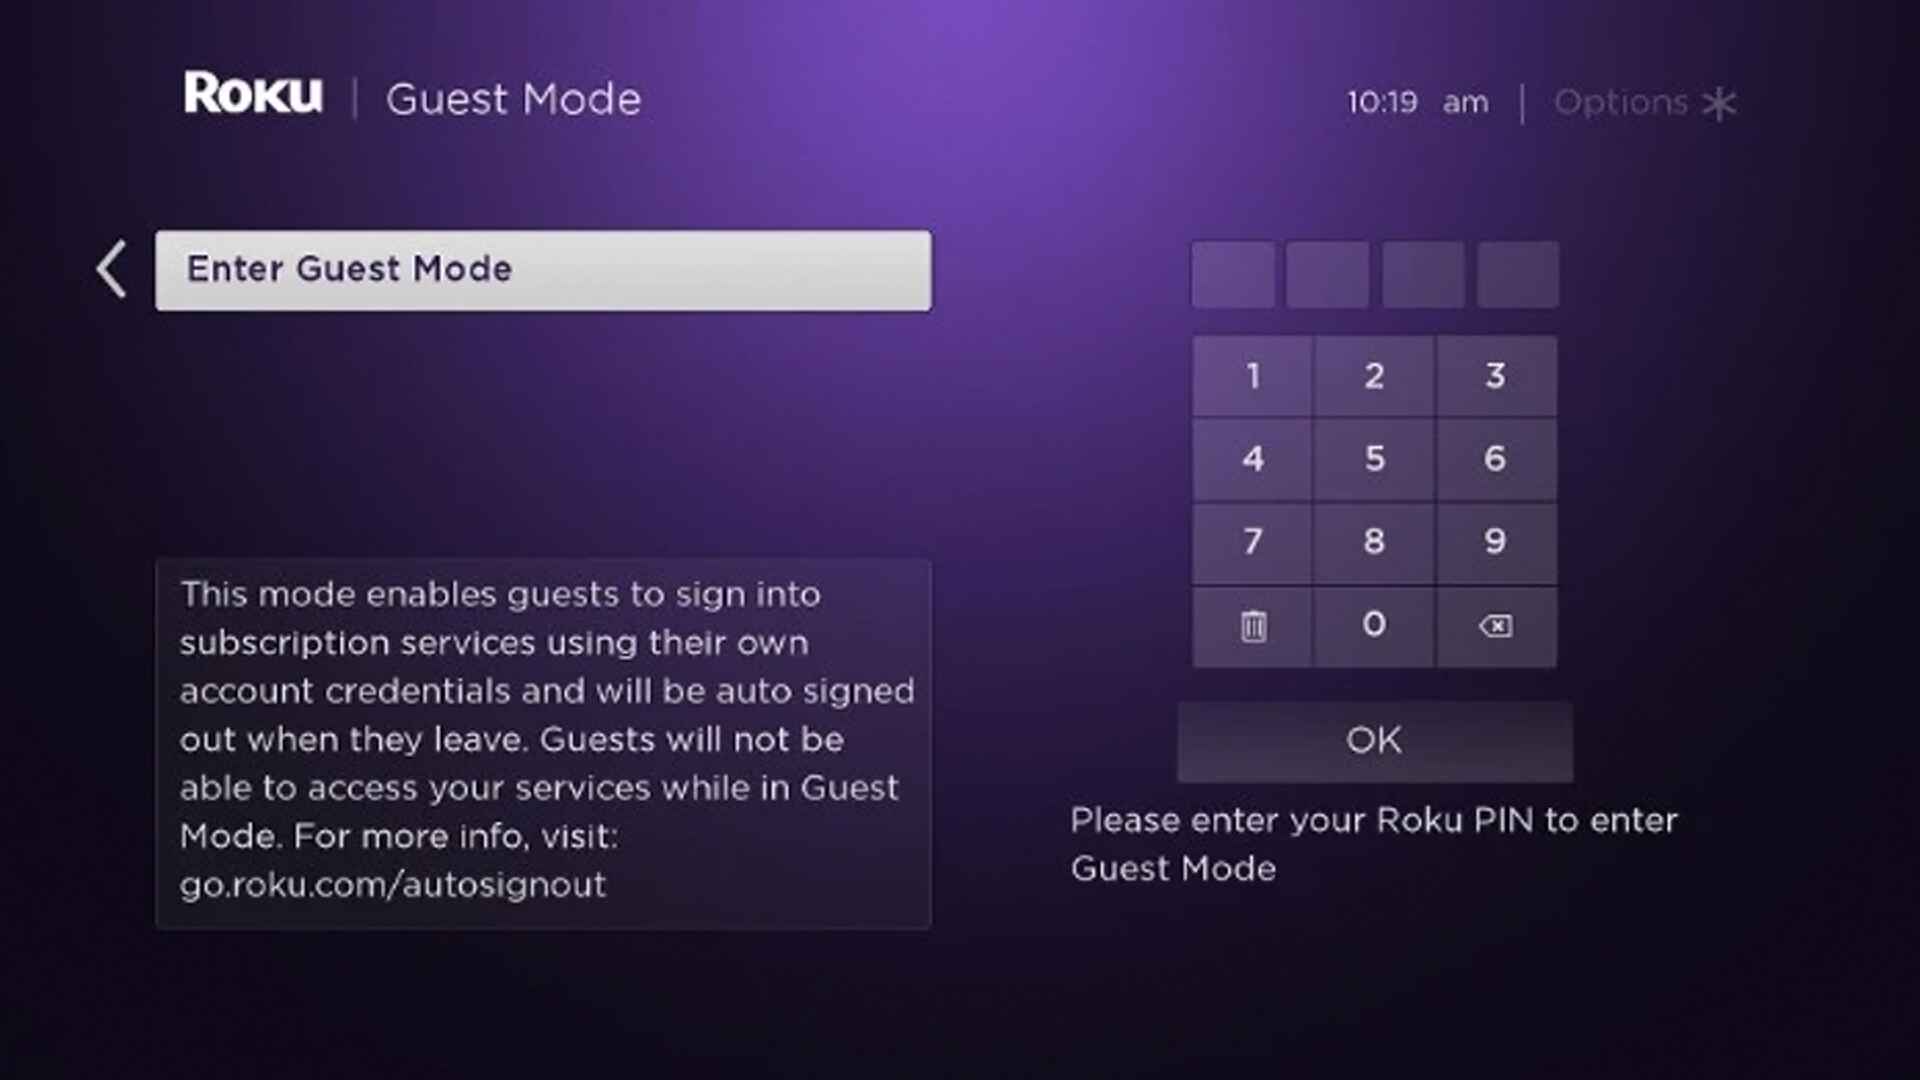 How Can I Find My Roku Pin